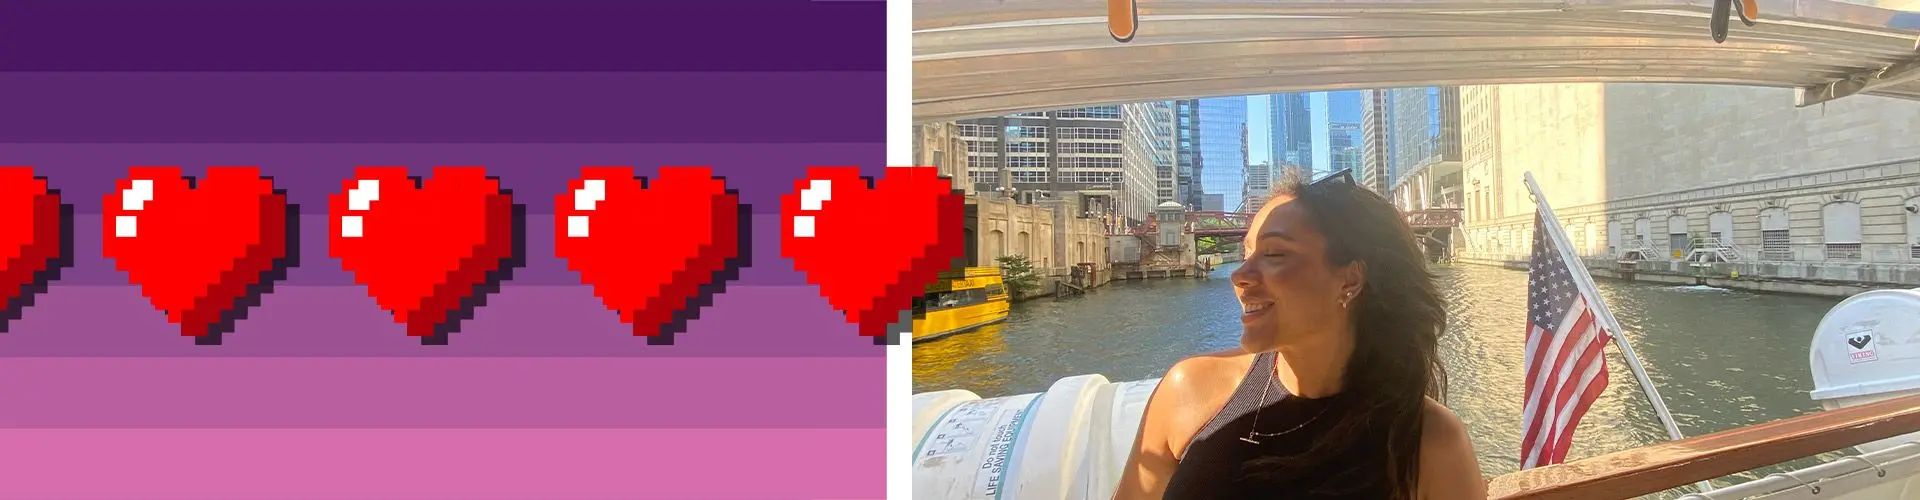 Red hearts come from the left on a purple pixelated background. Girl pose for picture on river.